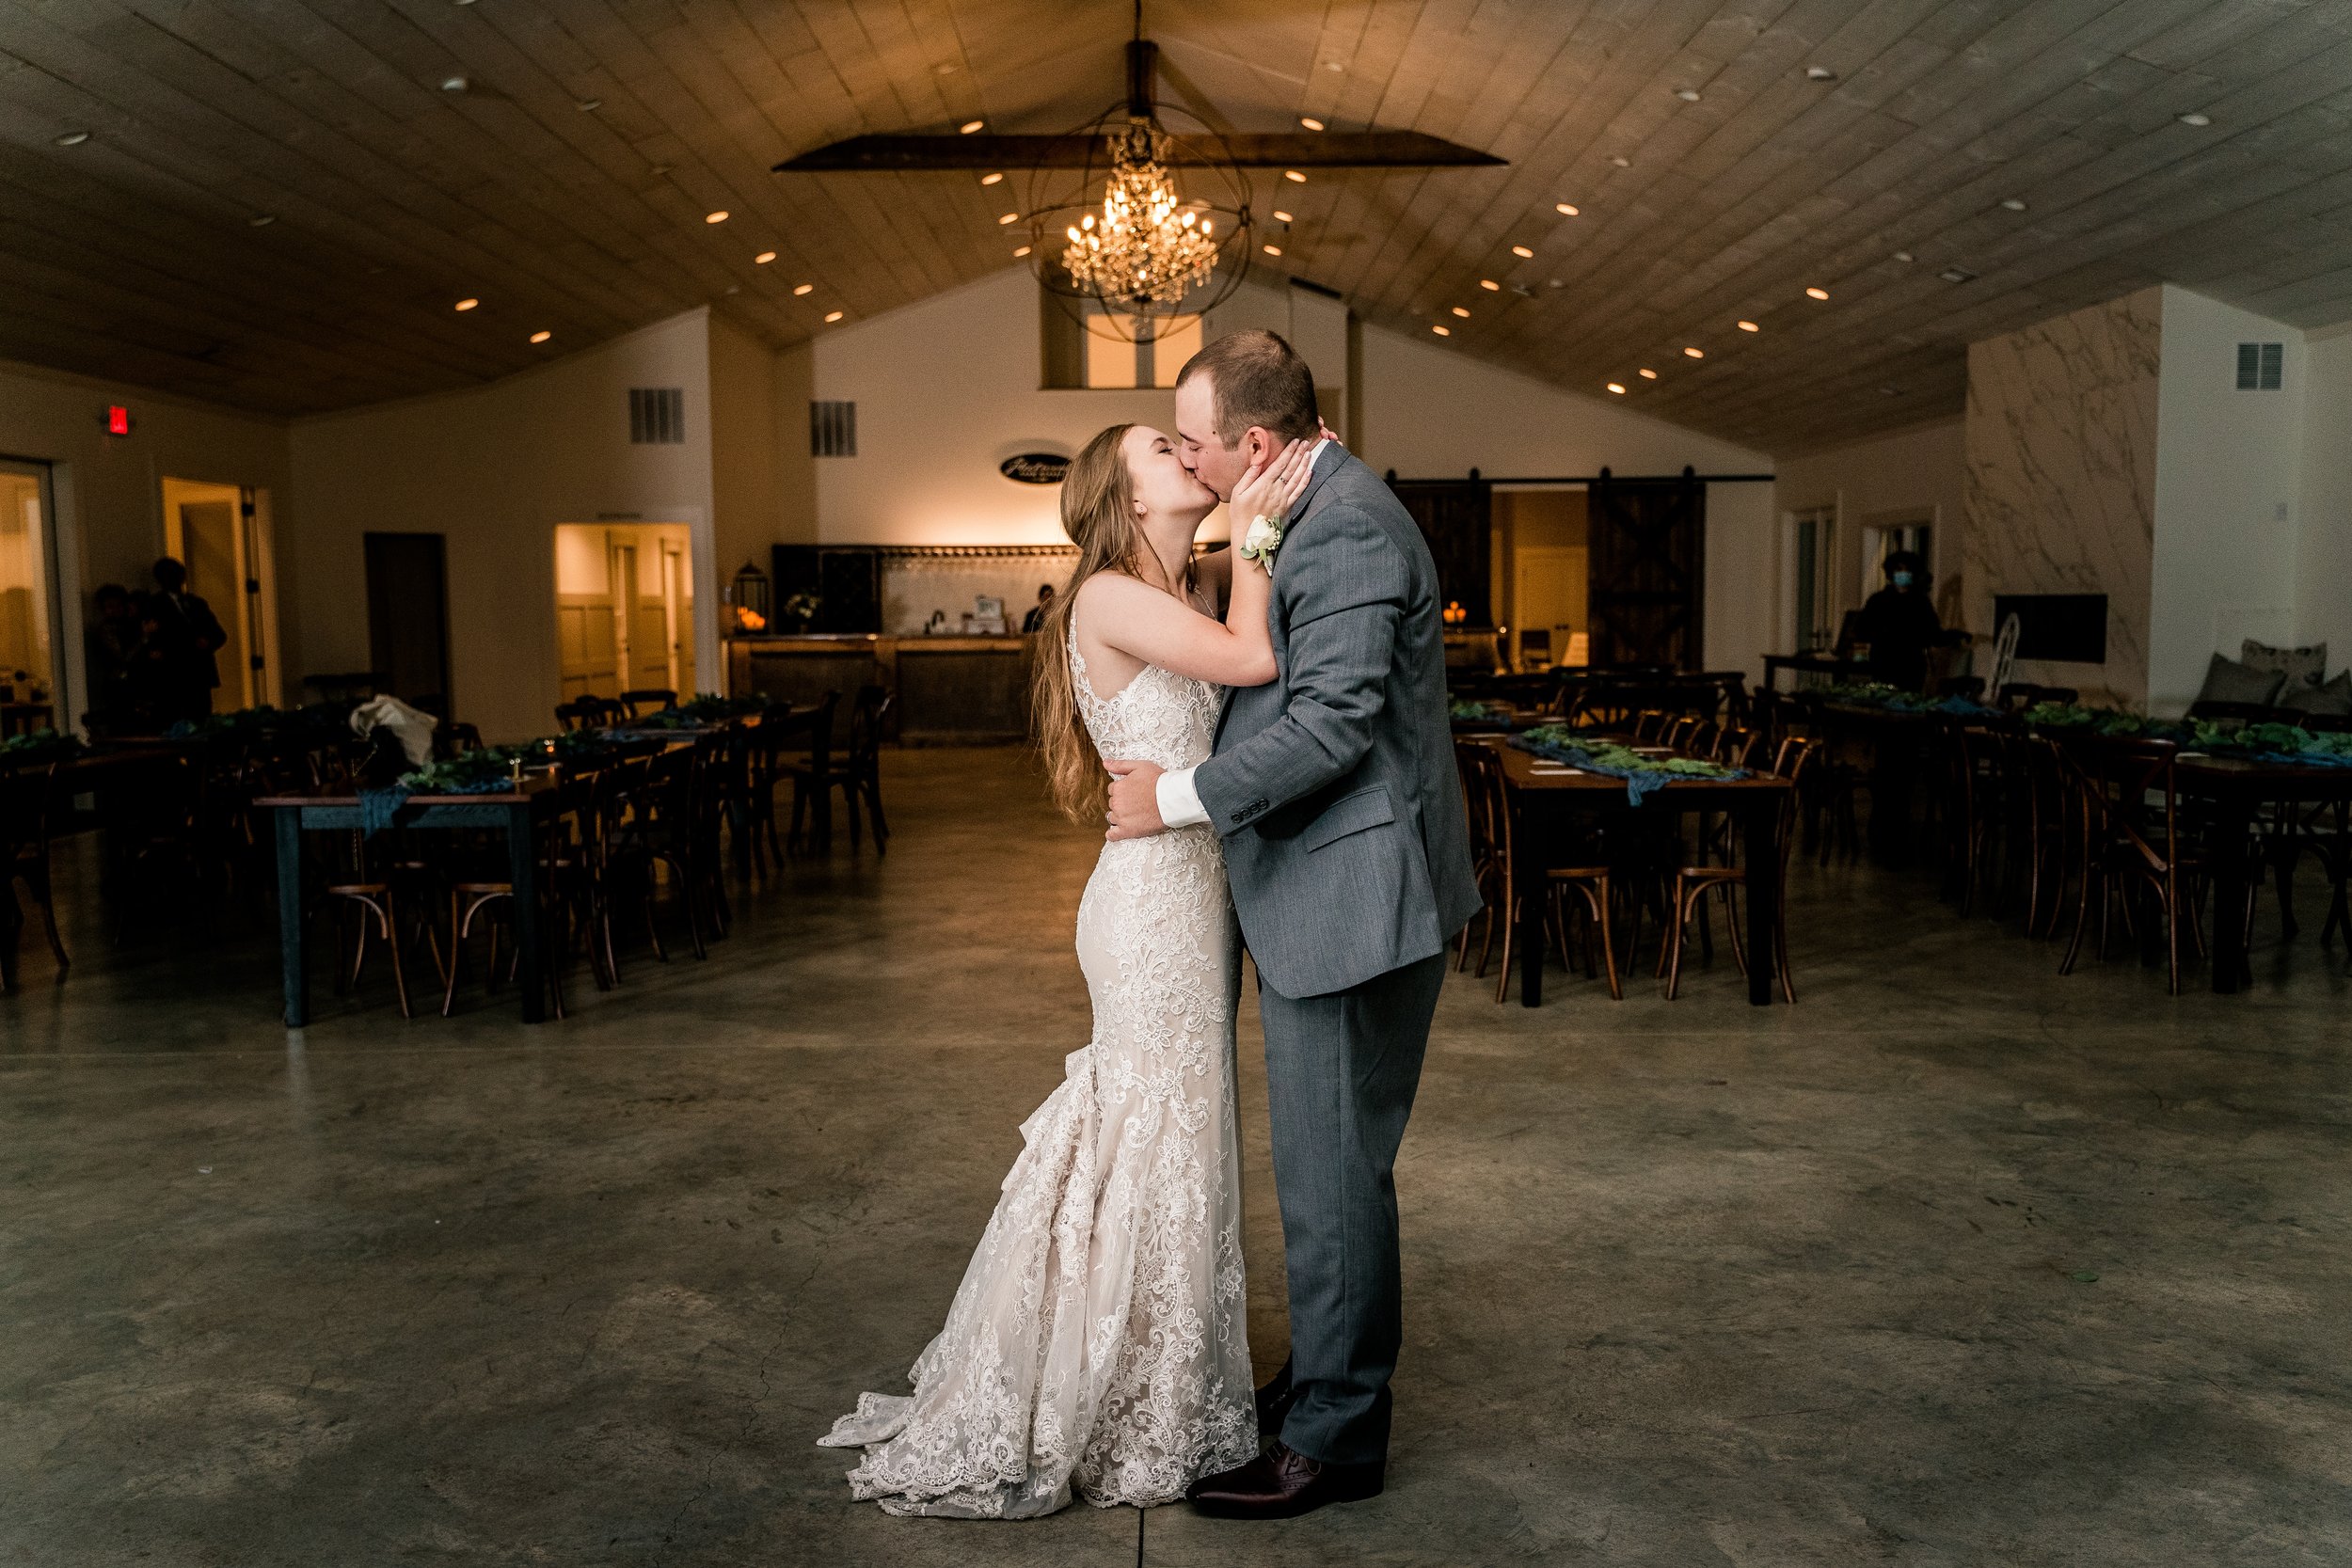 A bride and groom share a kiss during their private last dance at the end of their wedding at one of the best wedding venues in Northern Virginia